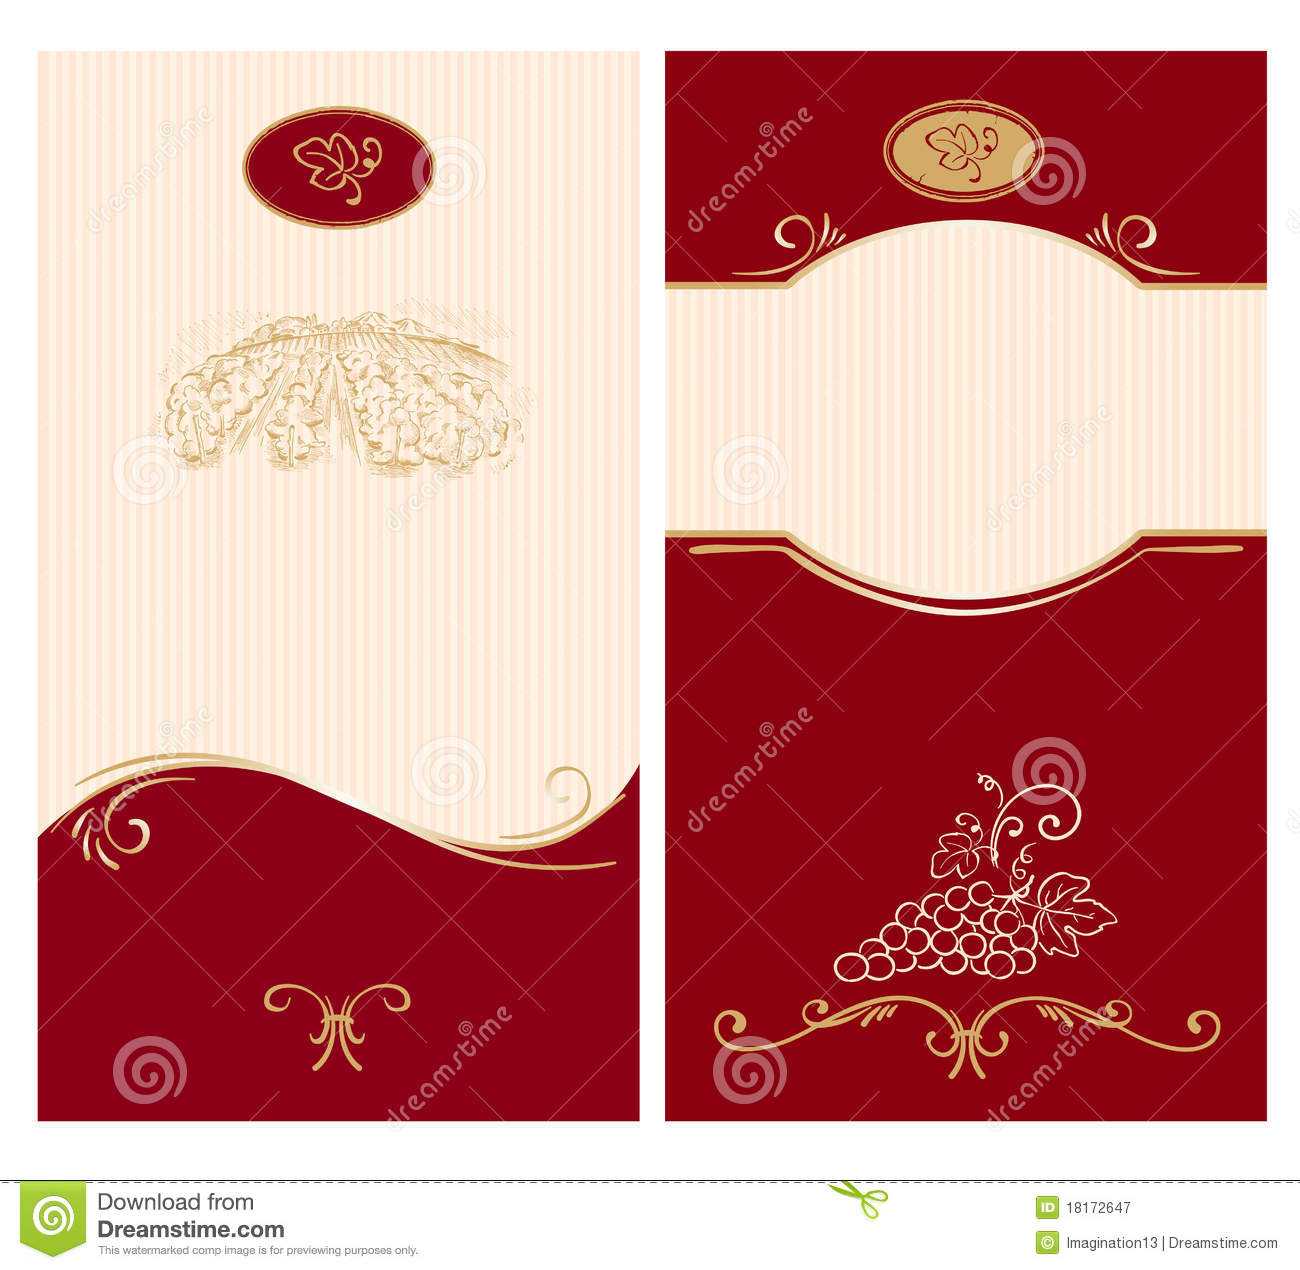 Template For Wine Labels Stock Vector. Illustration Of With Regard To Blank Wine Label Template